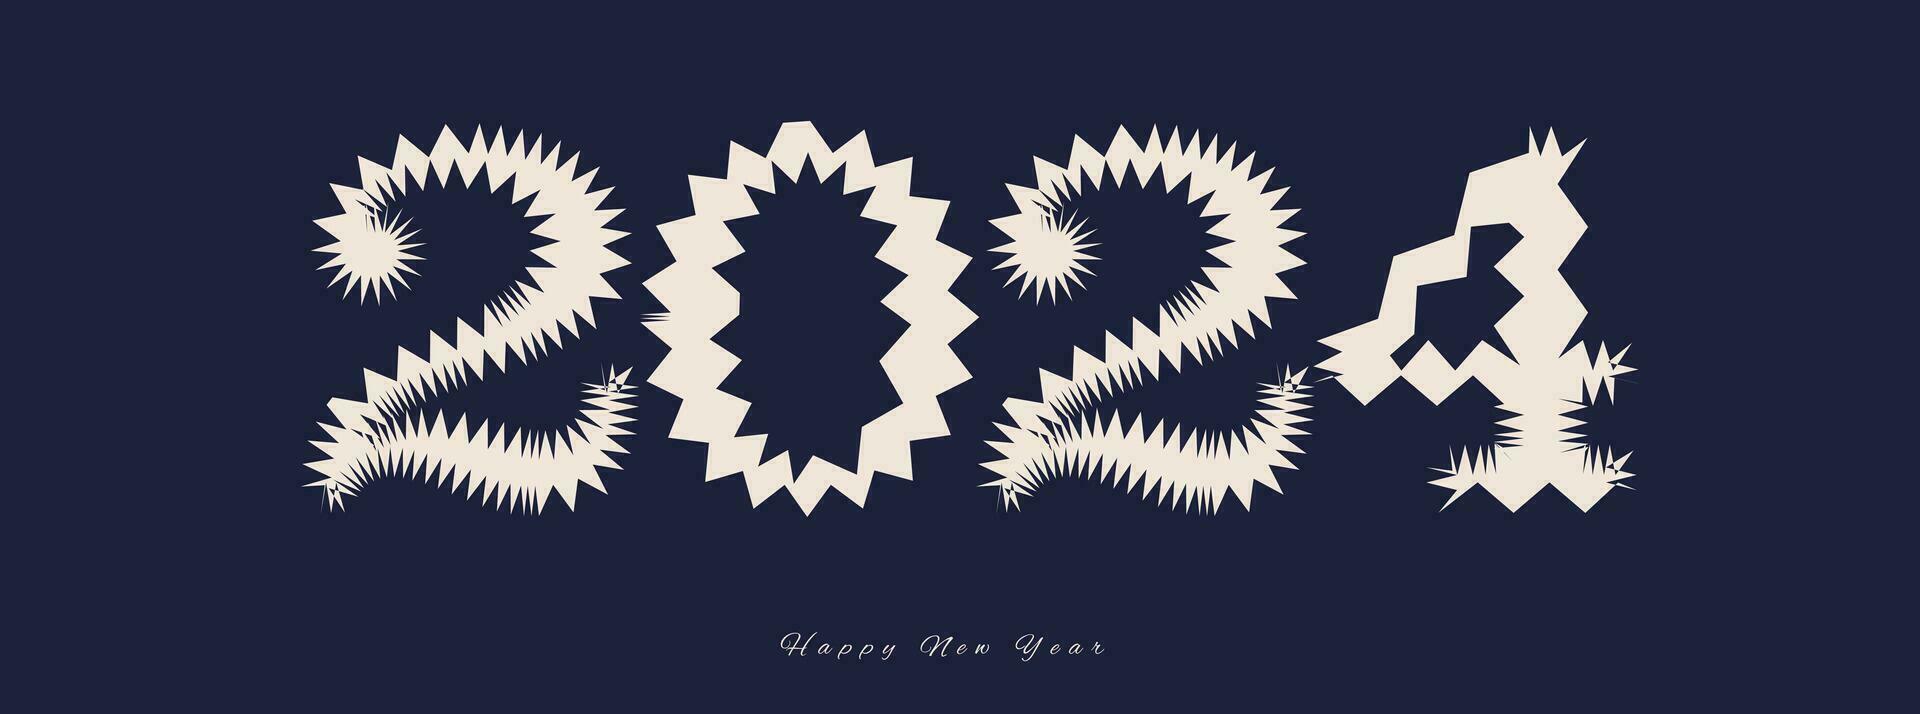 Decorated Happy New Year 2024 Design .Premium Trend Vector Illustration For Banner, T Shirt, Poster, Calendar And Invitation Cards. Happy New Year 2024.